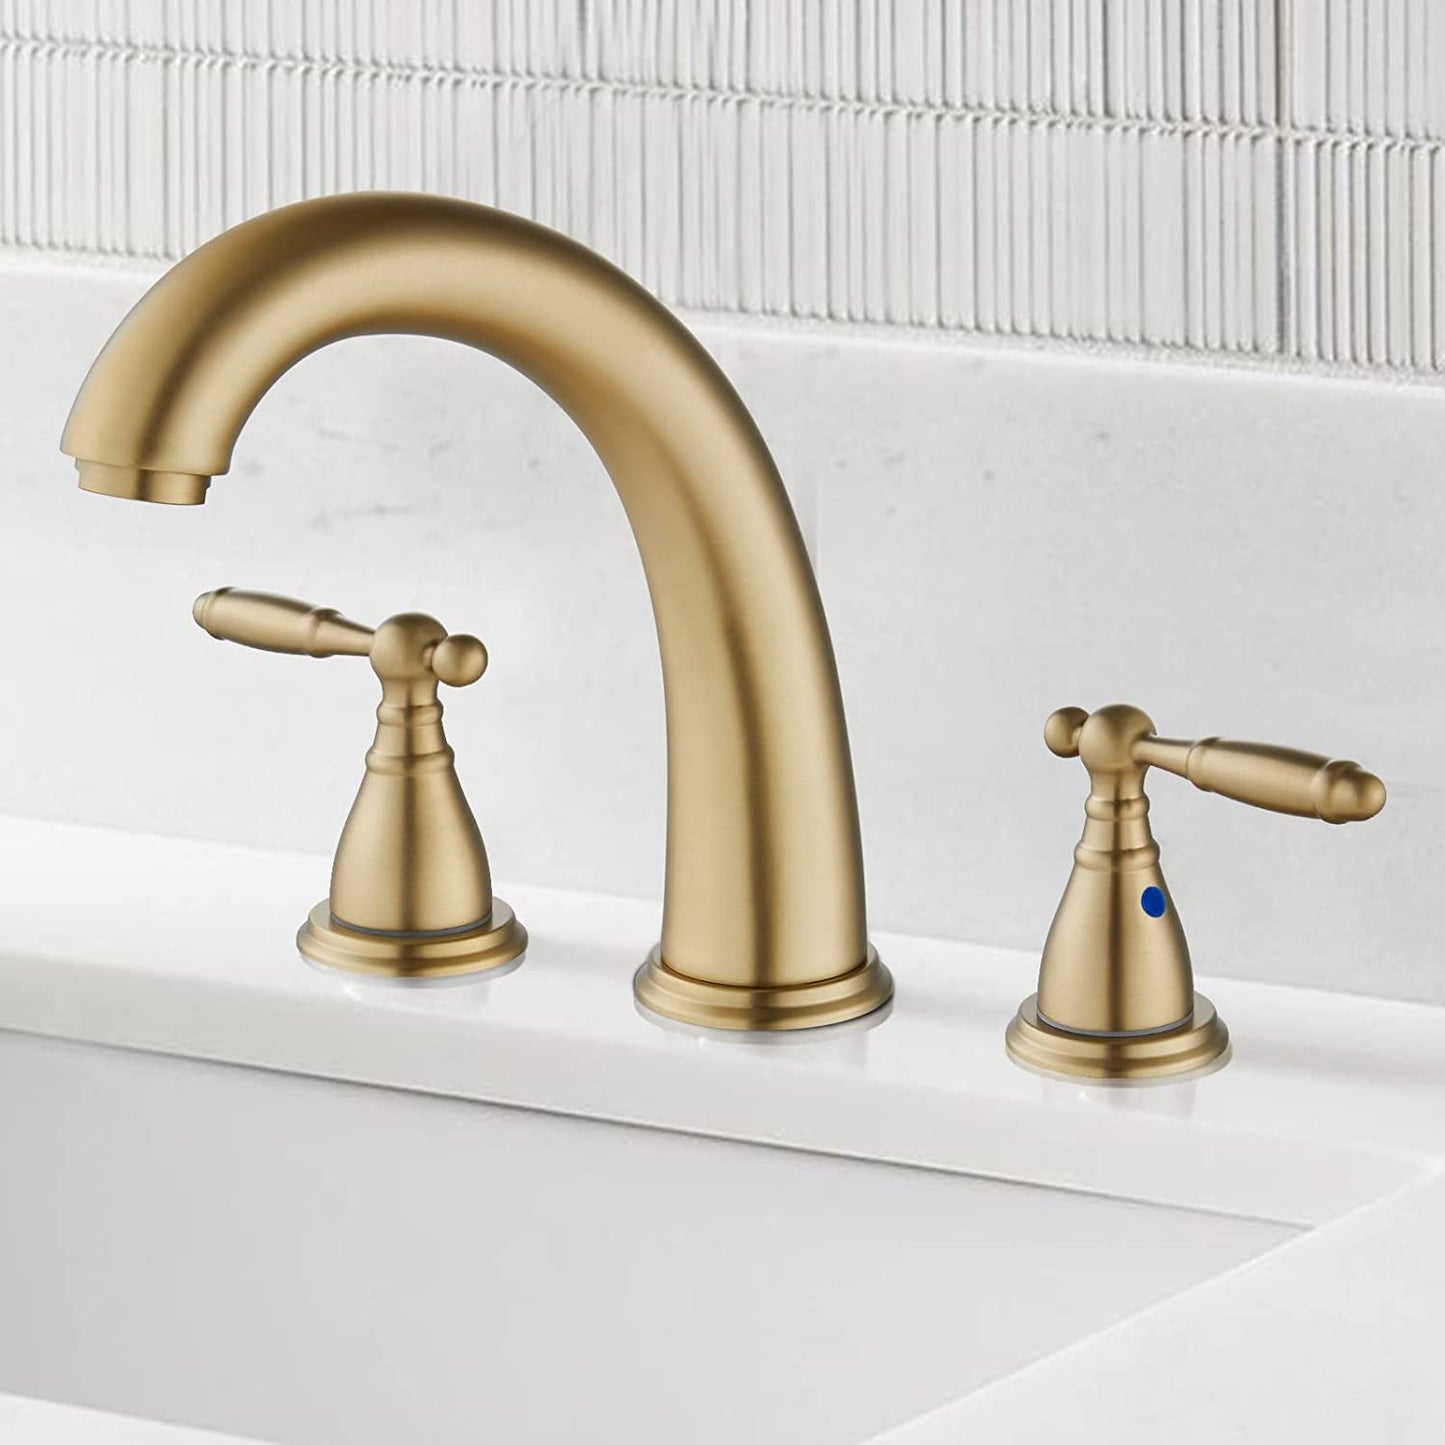 TRUSTMI 2 Handle 8 Inch Brass Bathroom Sink Faucet 3 Hole Widespread with  Valve and cUPC Water Supply Hoses, with Overflow Pop Up Drain Assembly